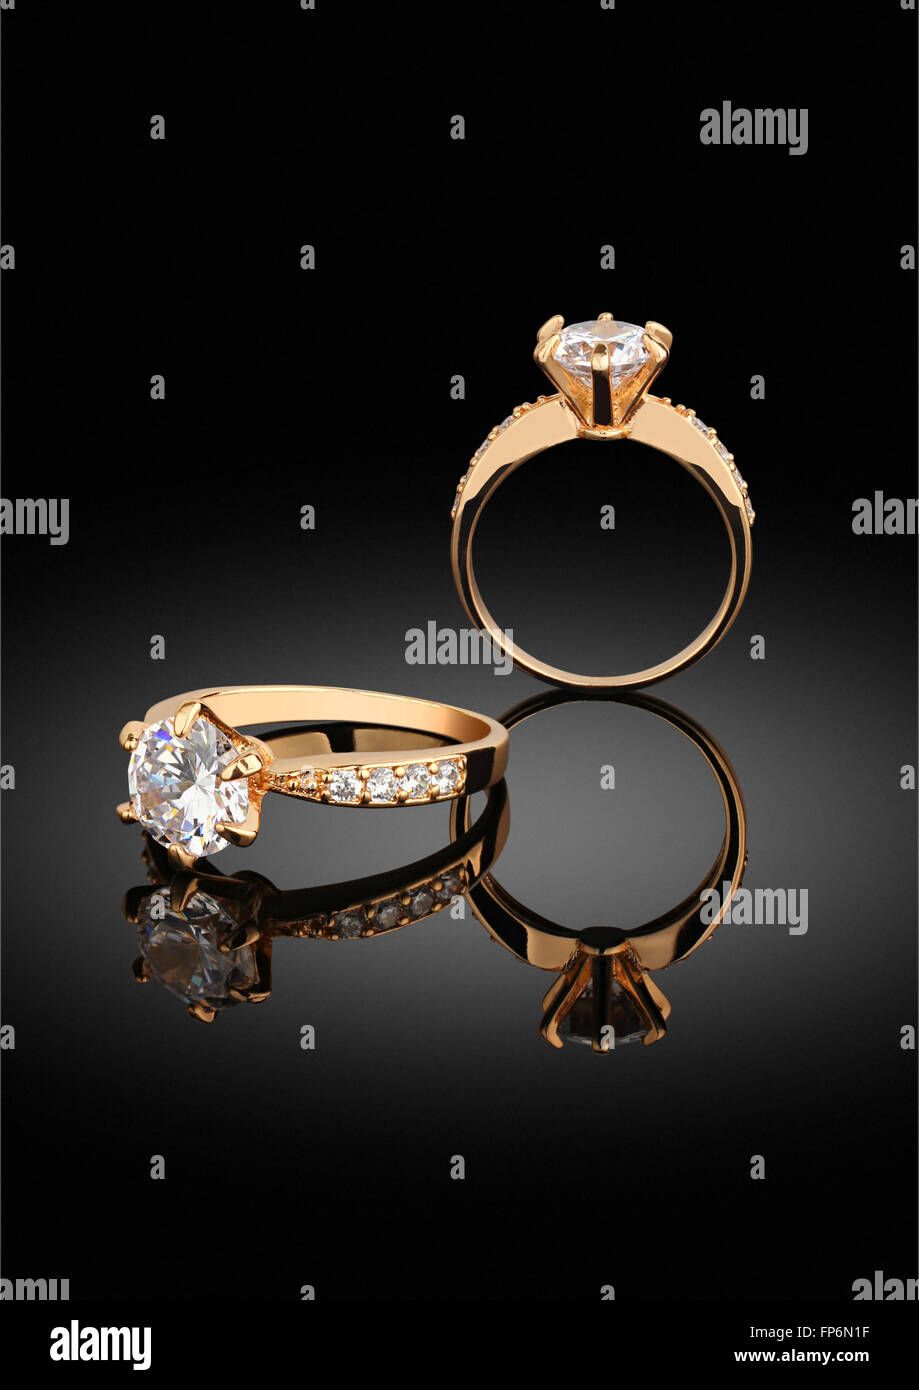 jewelry ring with diamonds on black background with reflection Stock Photo